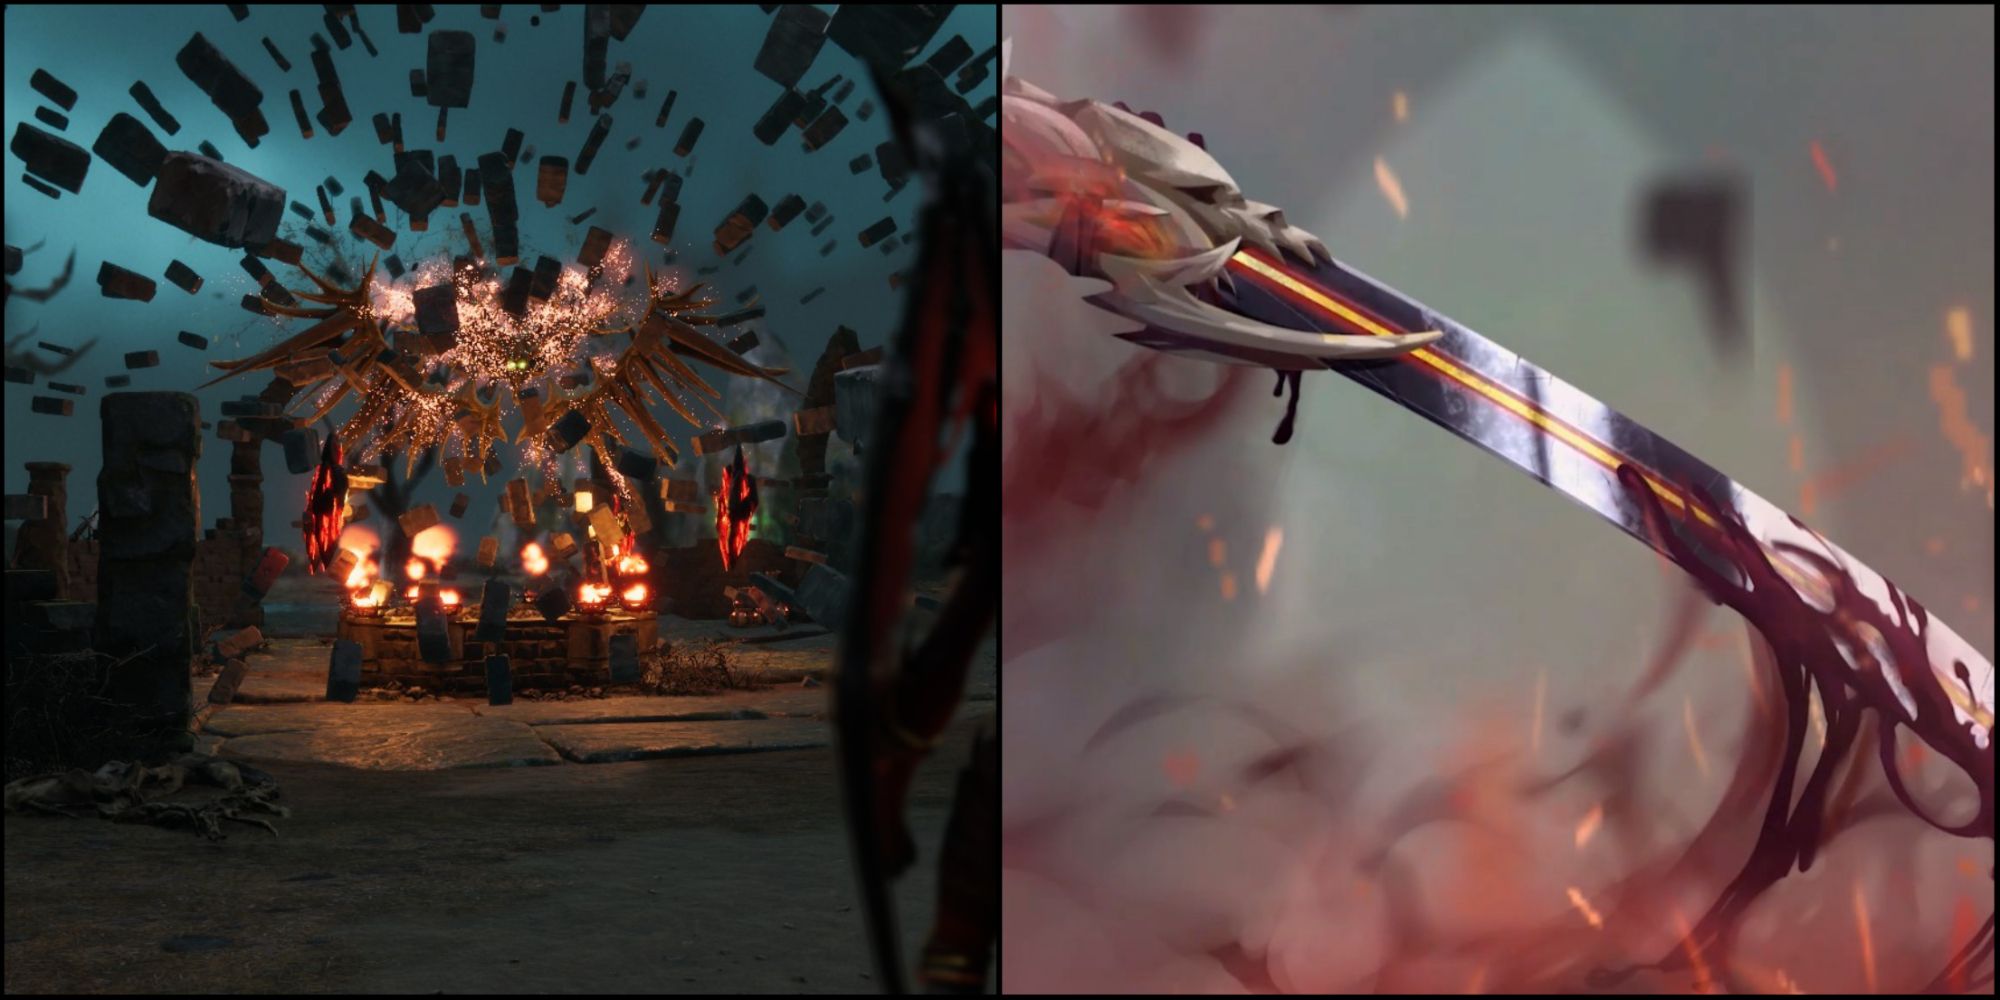 Yhelm's boss charging its shield on the left, the sword of the protagonist with blood on the right.